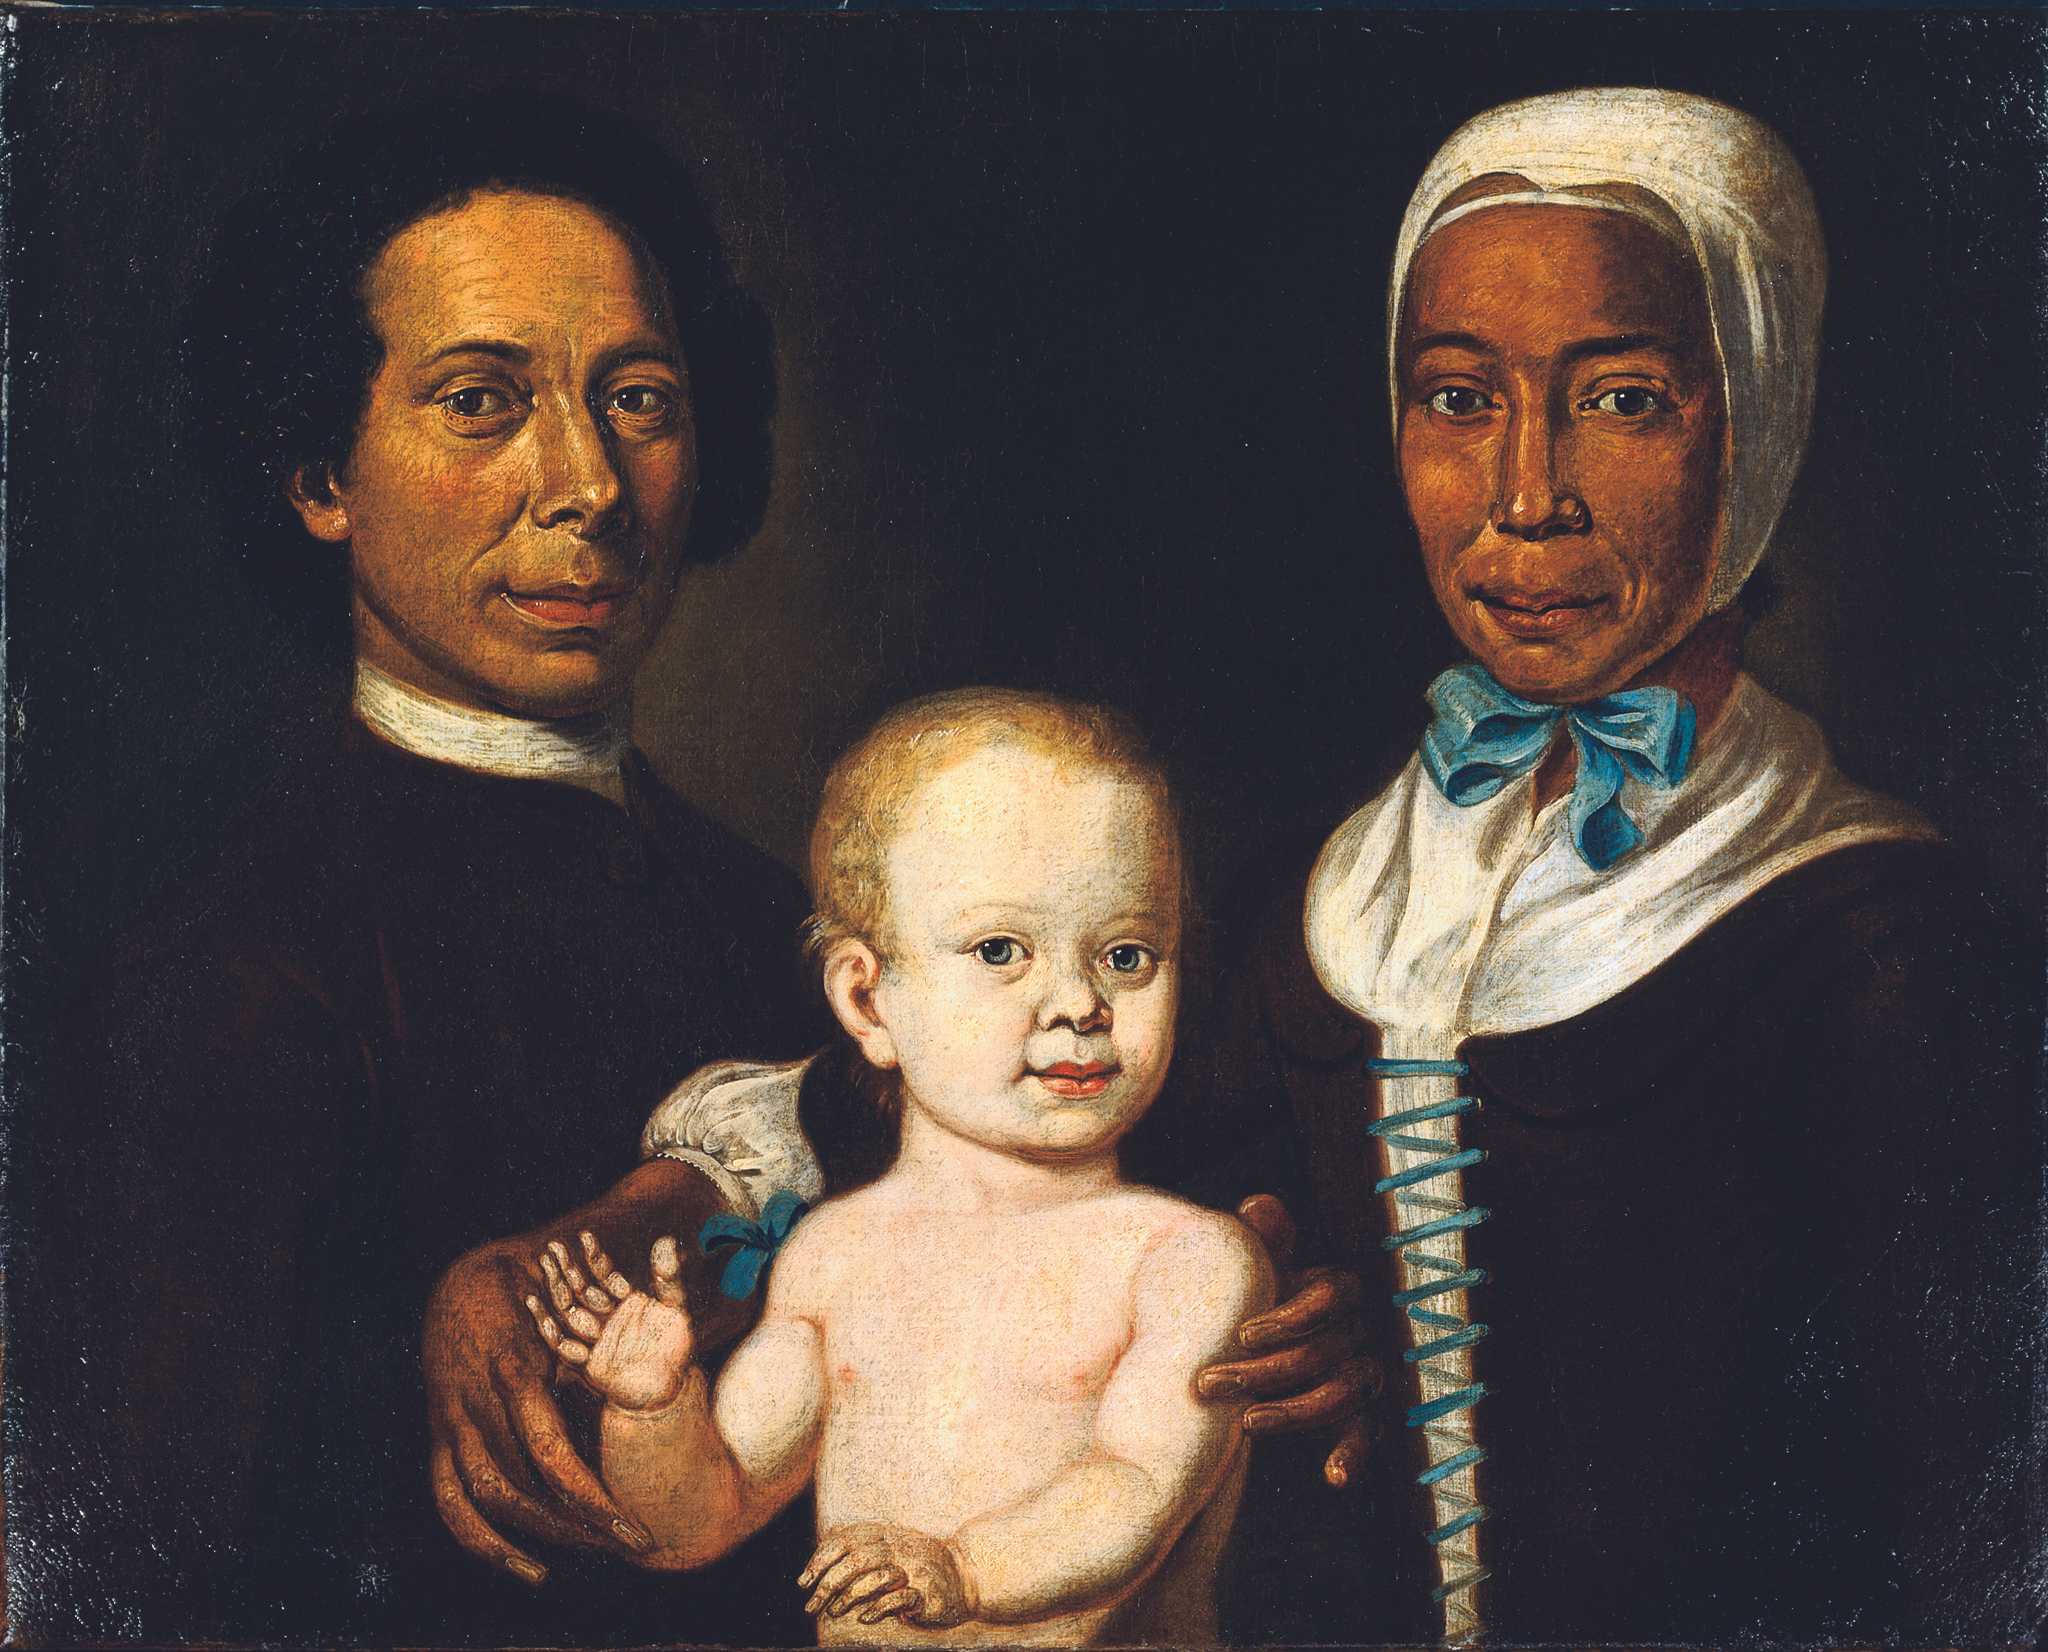 A painted portrait of Rebecca Protten posing with a black man and white baby.